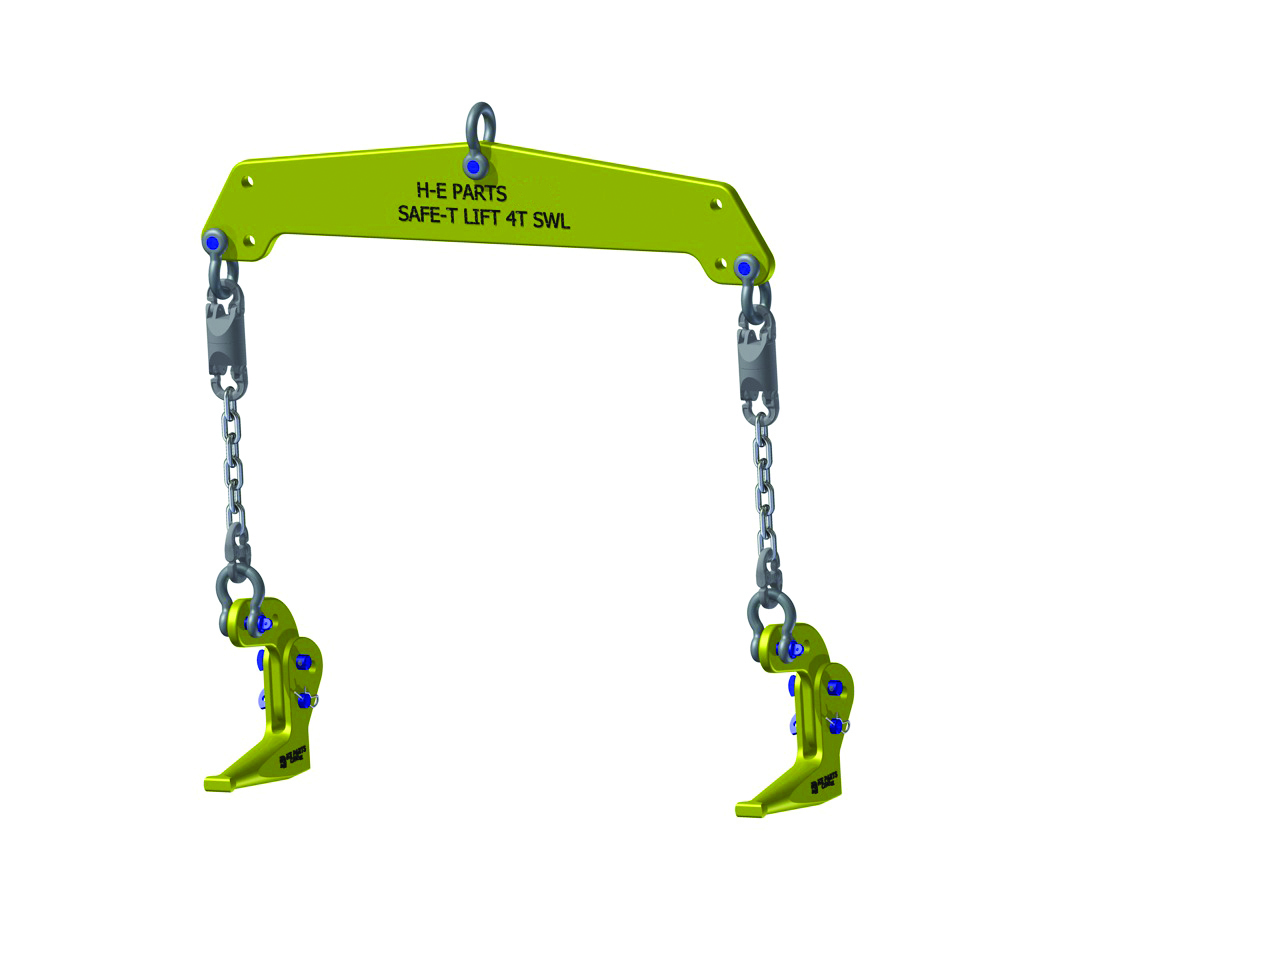 Safe-T Lift wear plate lifting assembly